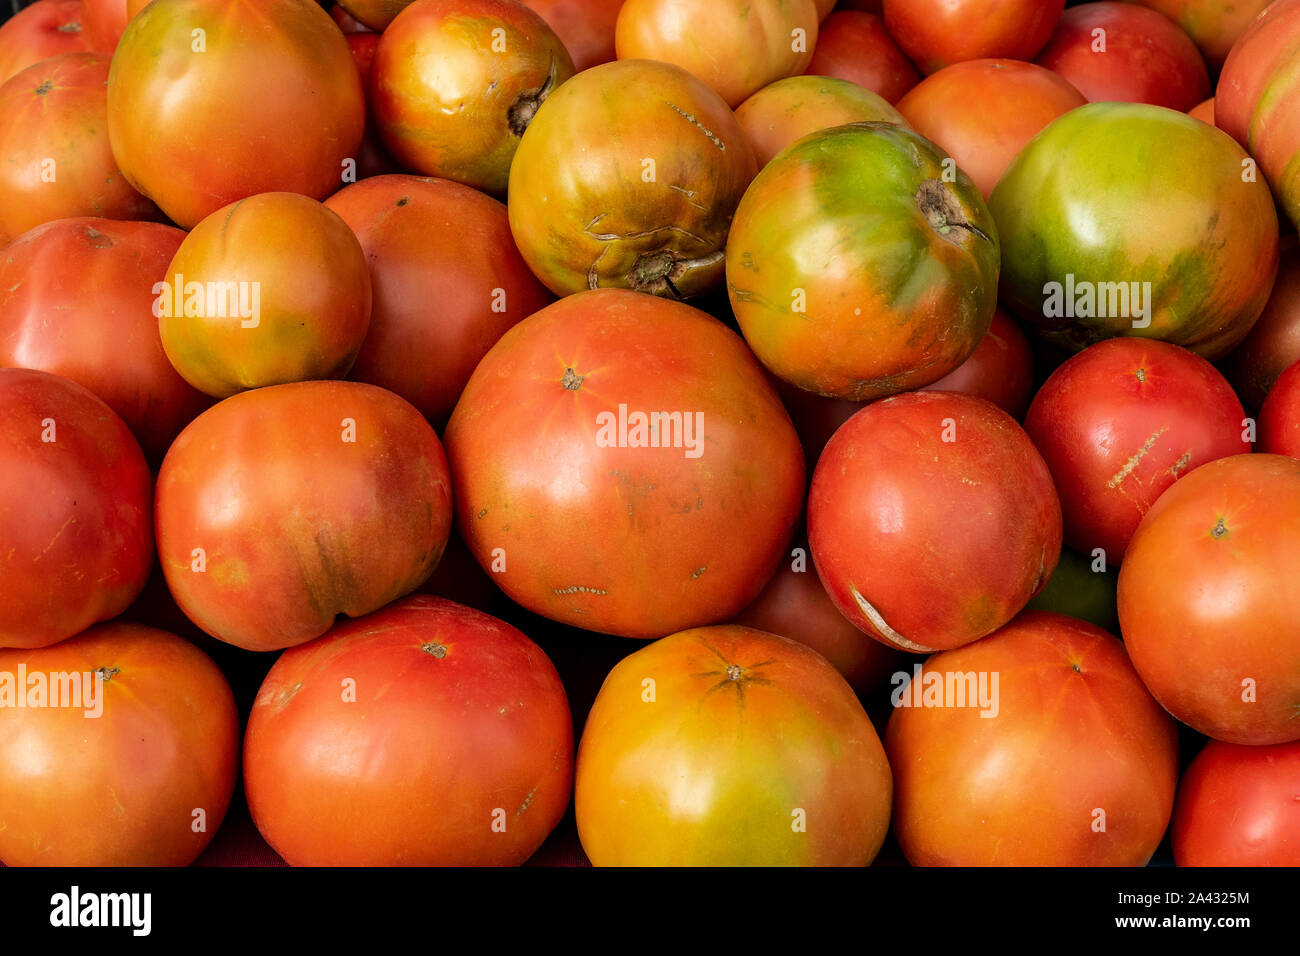 Tomatoes in the local organic products market, León, Spain Stock Photo